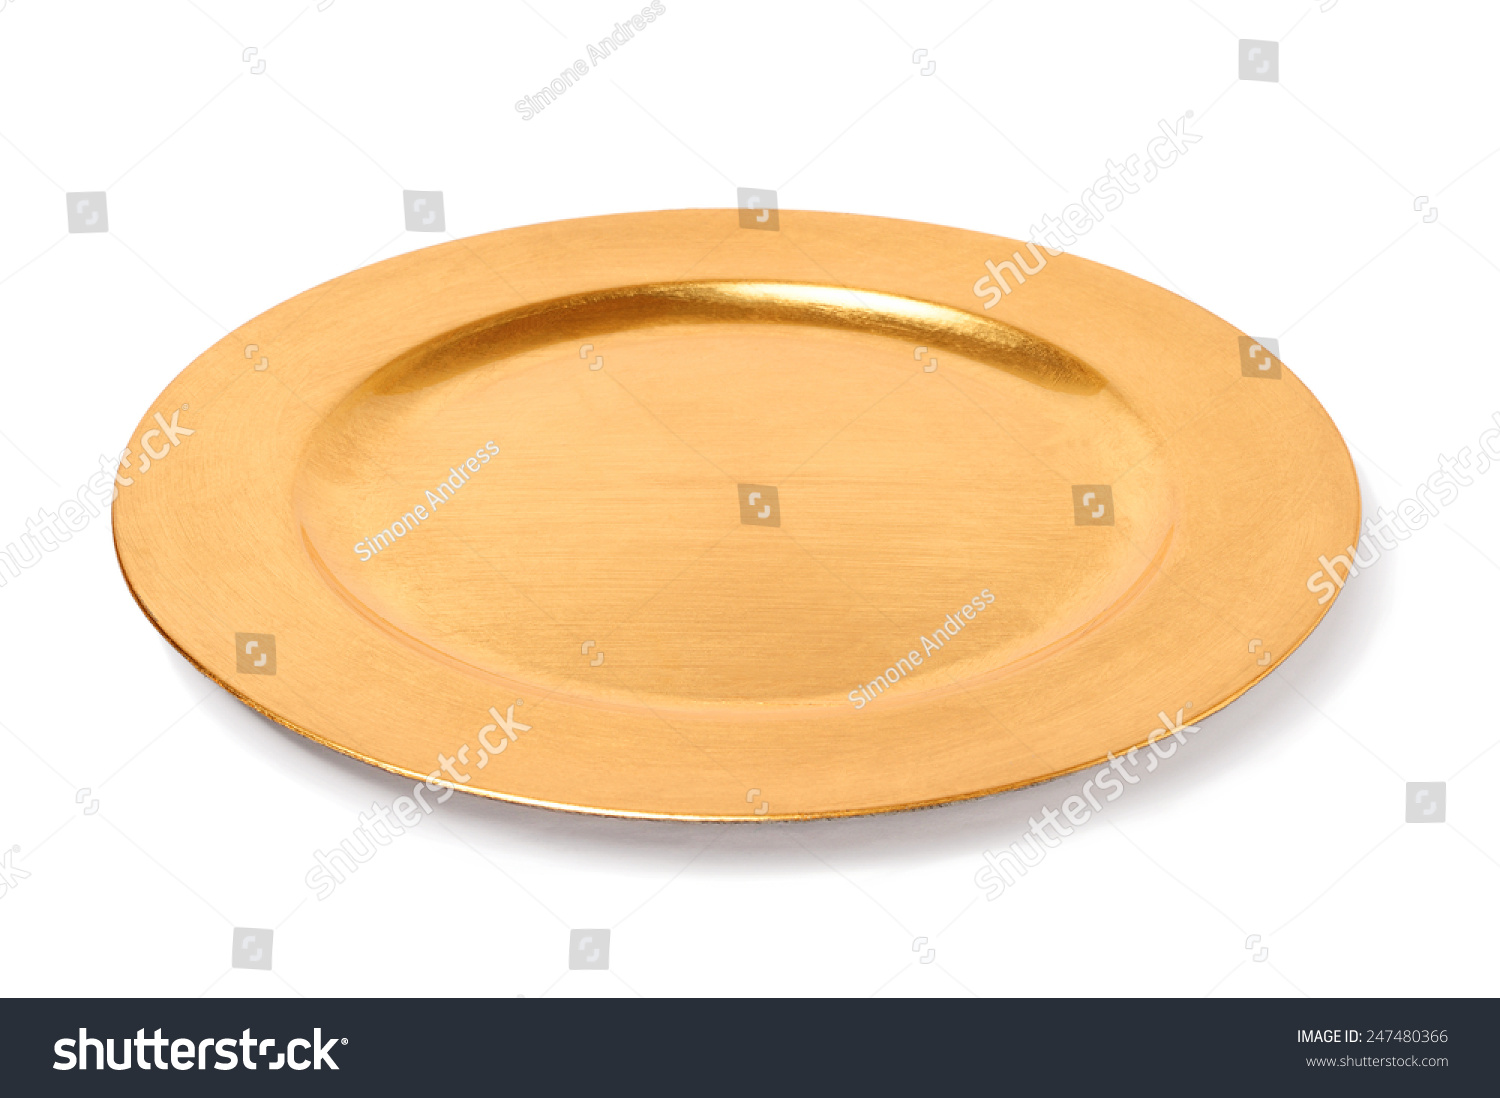 empty golden plate isolated over white background #247480366